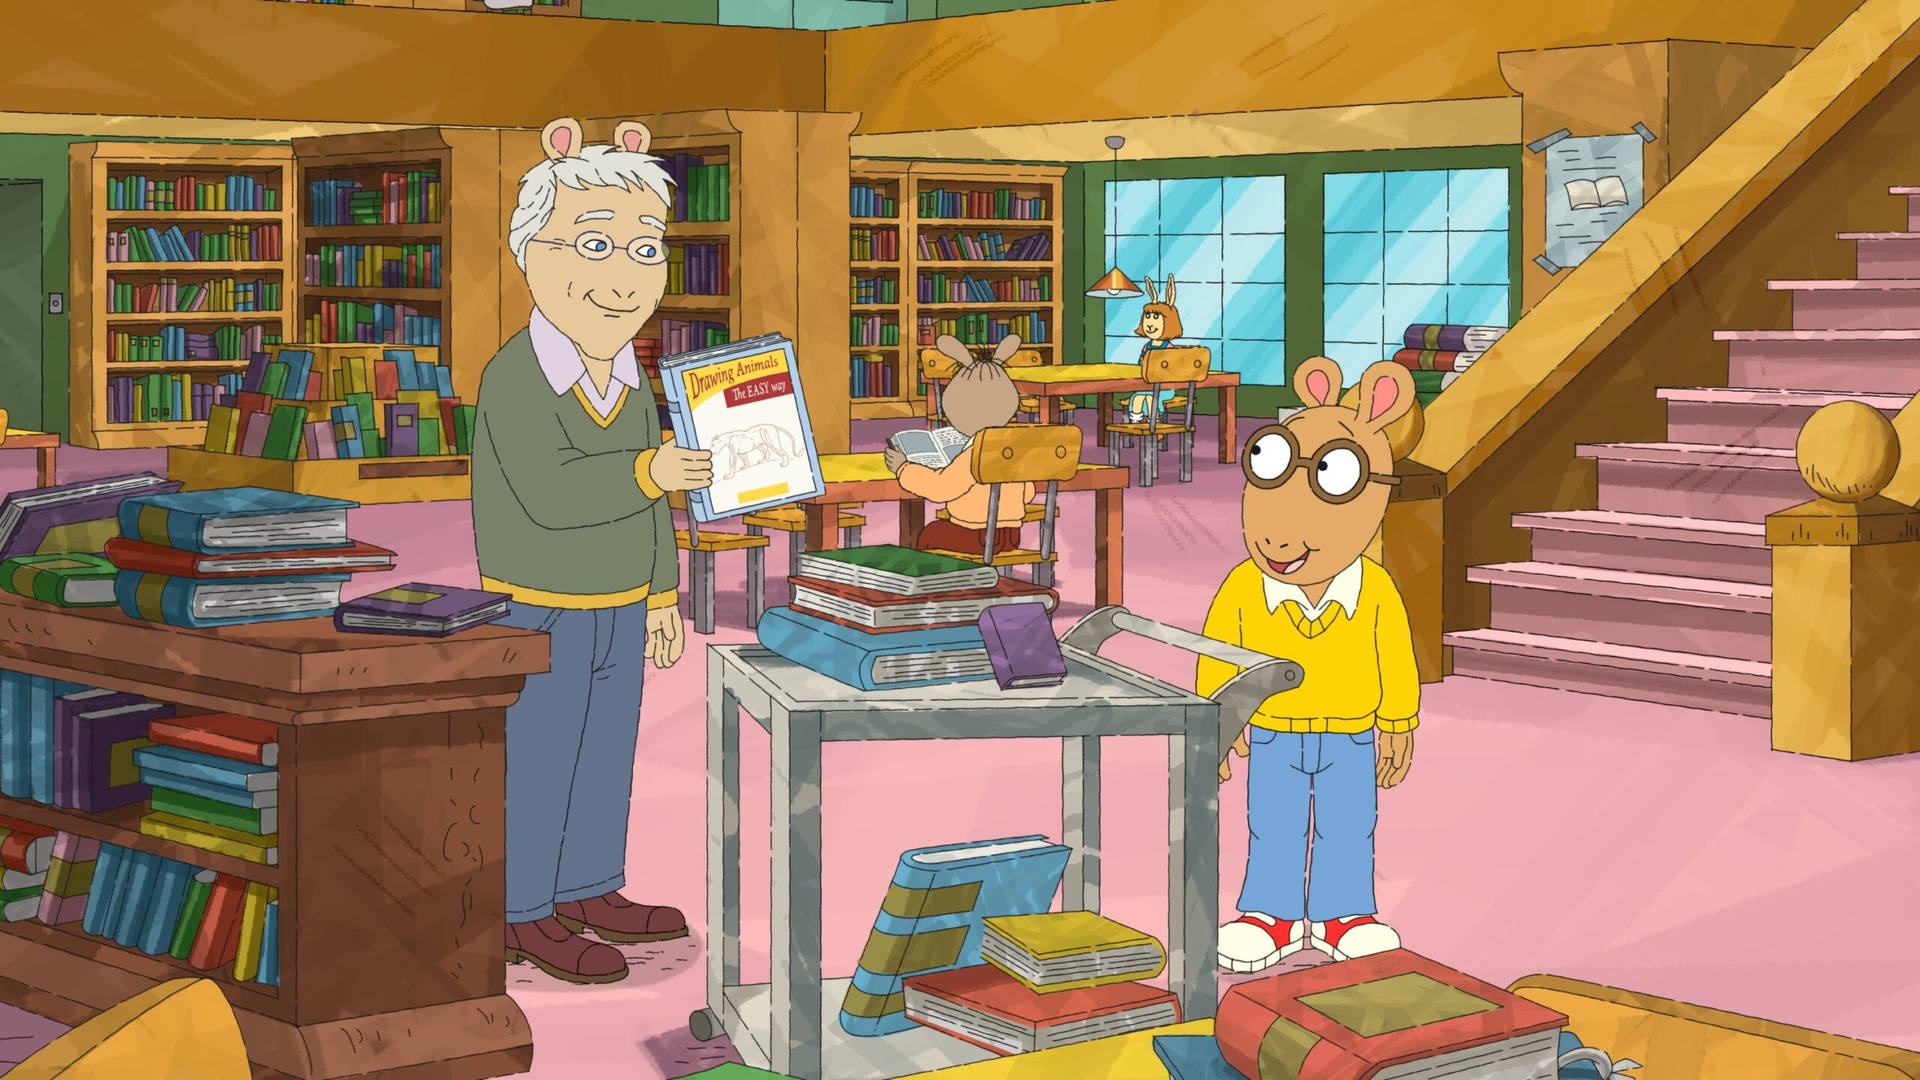 "Arthur and Marc Brown Engrossed in a Book in the Library" Wallpaper